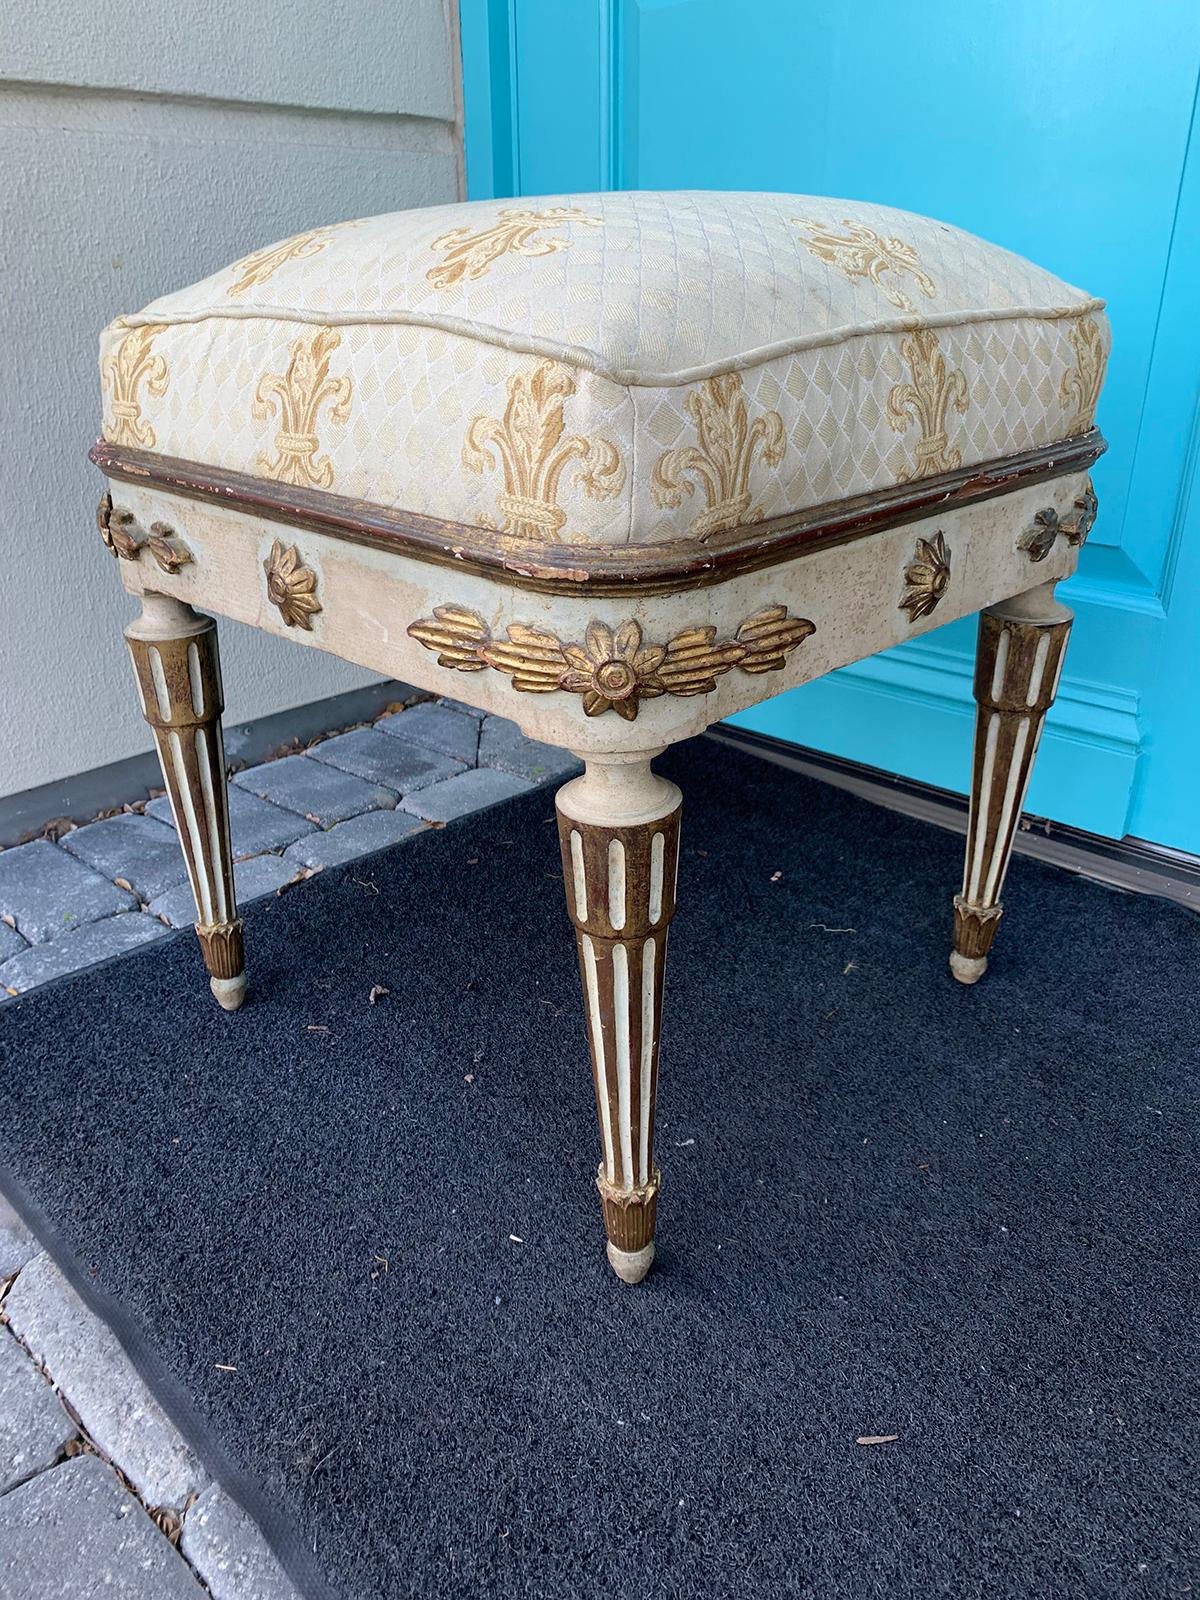 19th-20th Italian Neoclassical Polychrome Stool with handwritten 